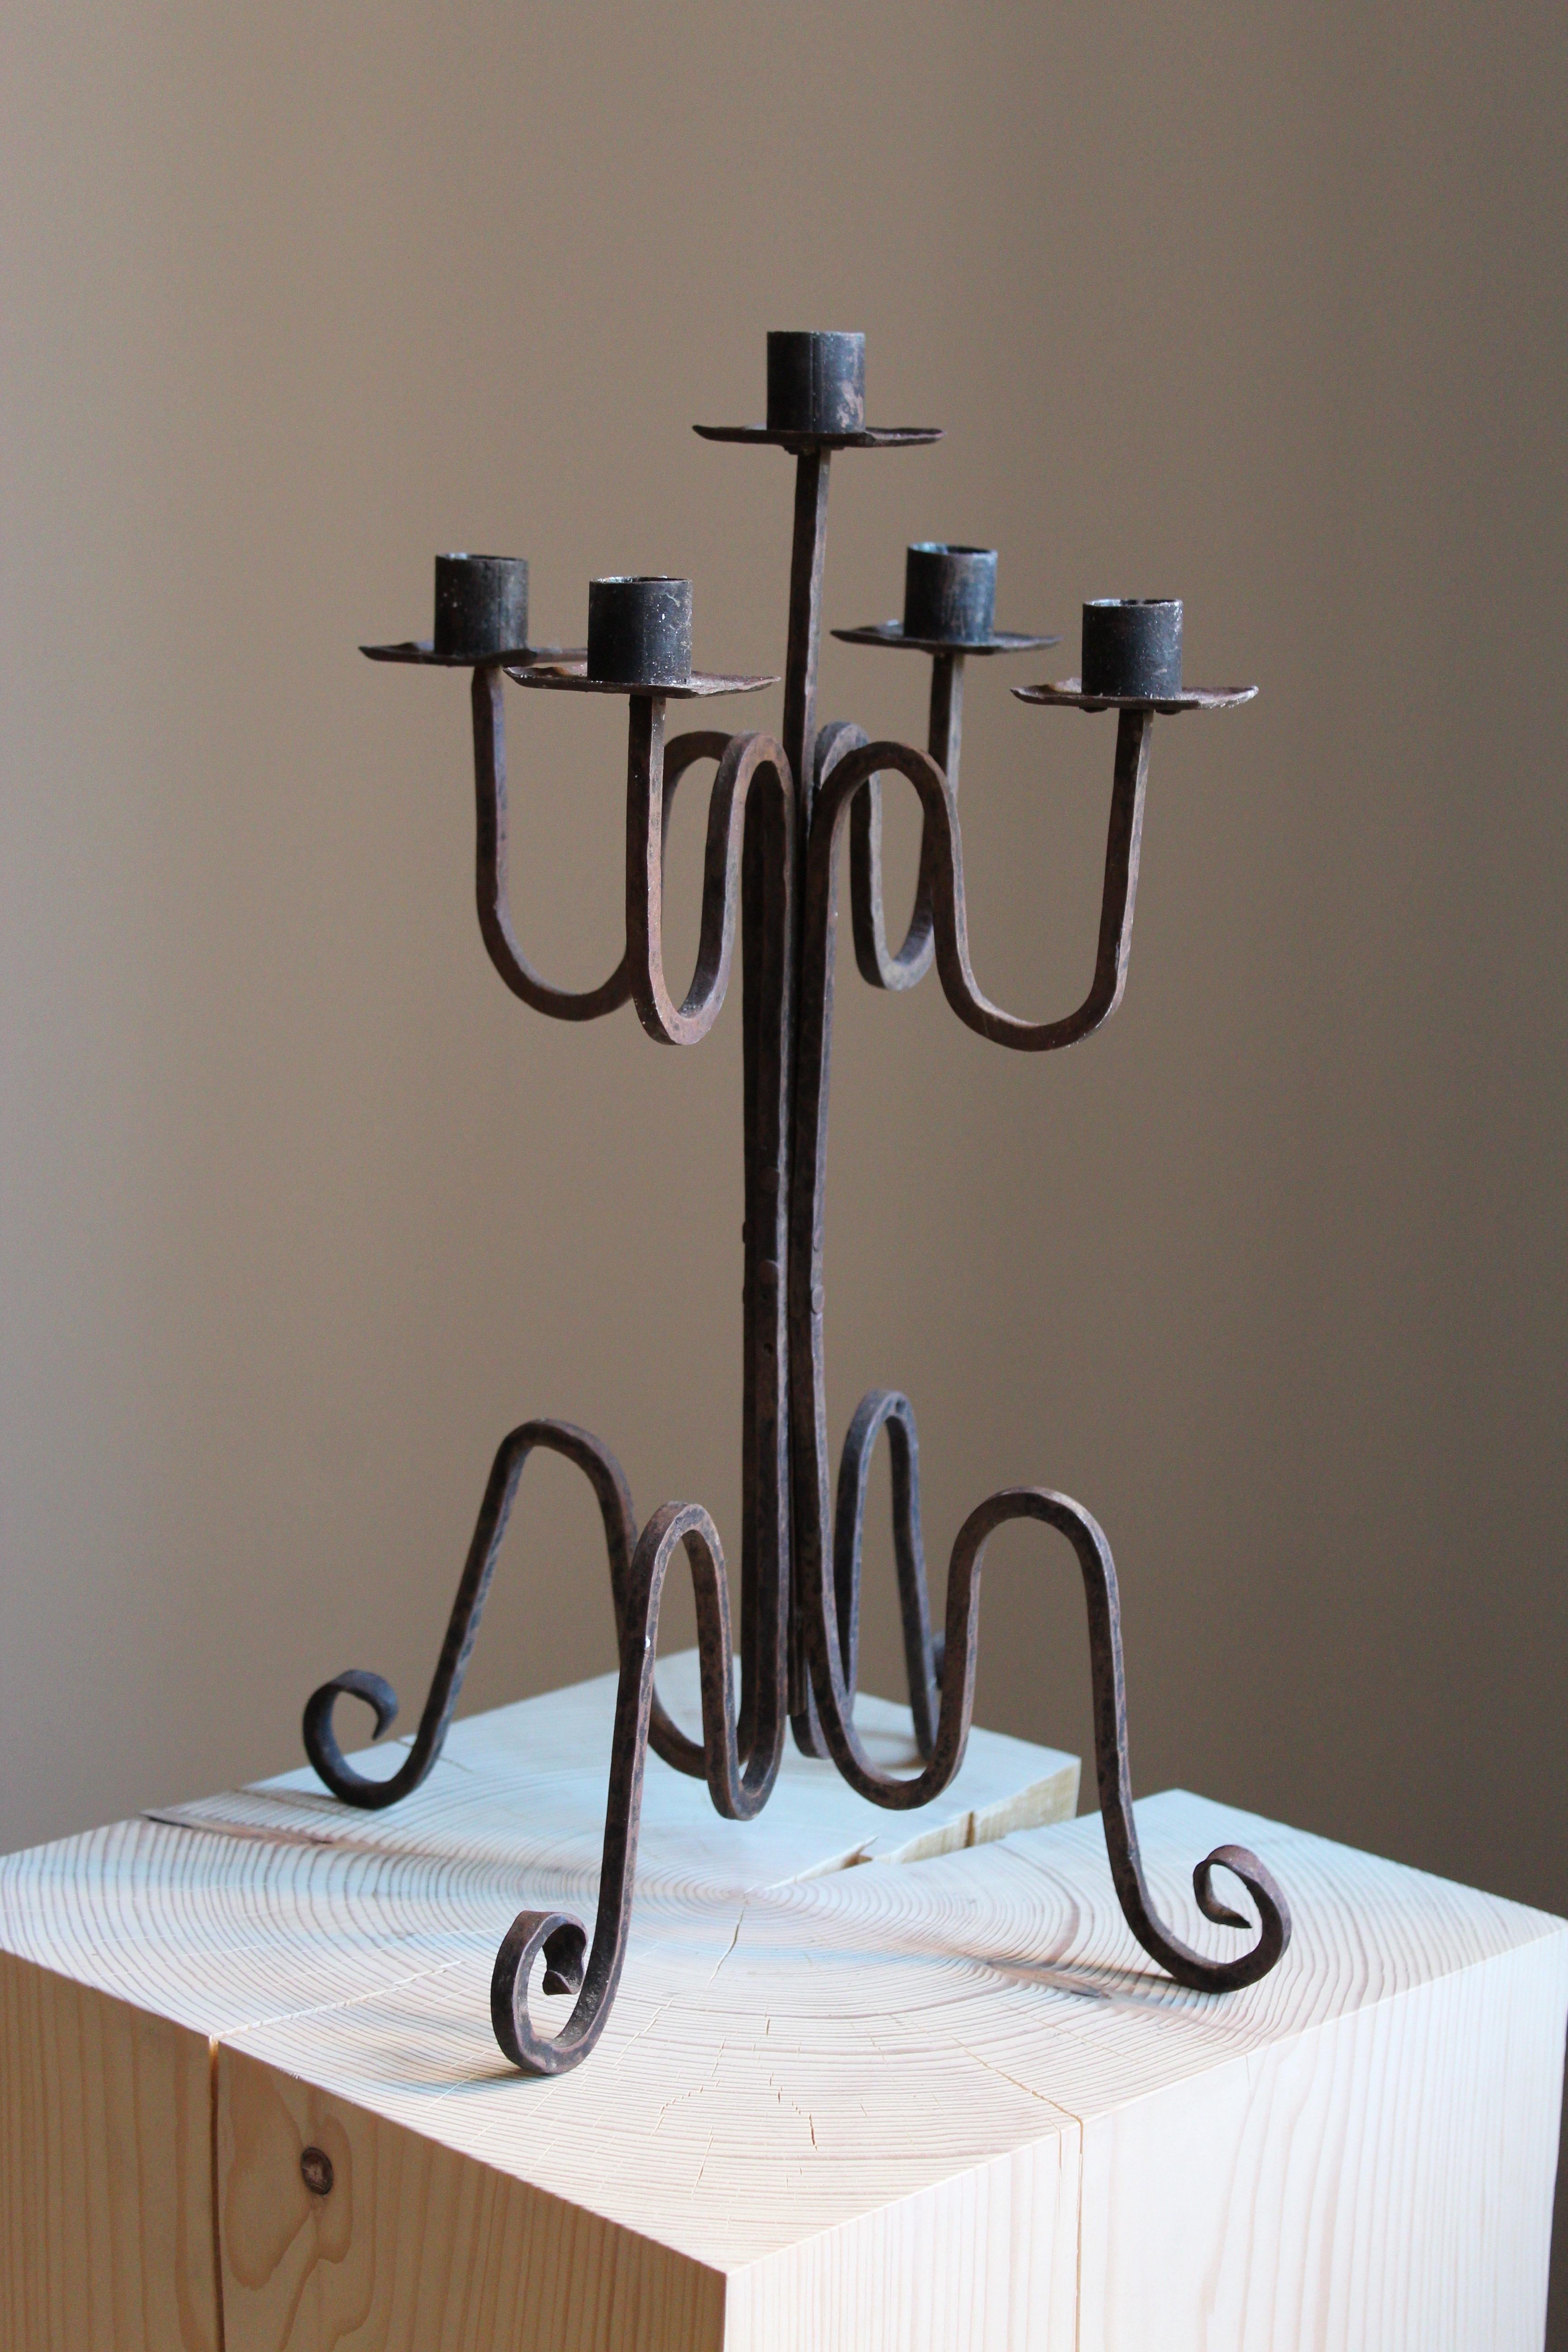 A sculptural handcrafted candelabrum.

Produced in Sweden, circa 1940s.

Other designers of the period include Diego Giacometti, Lars Holmström, Josef Frank, Folke Bensow, and Line Vautrin.